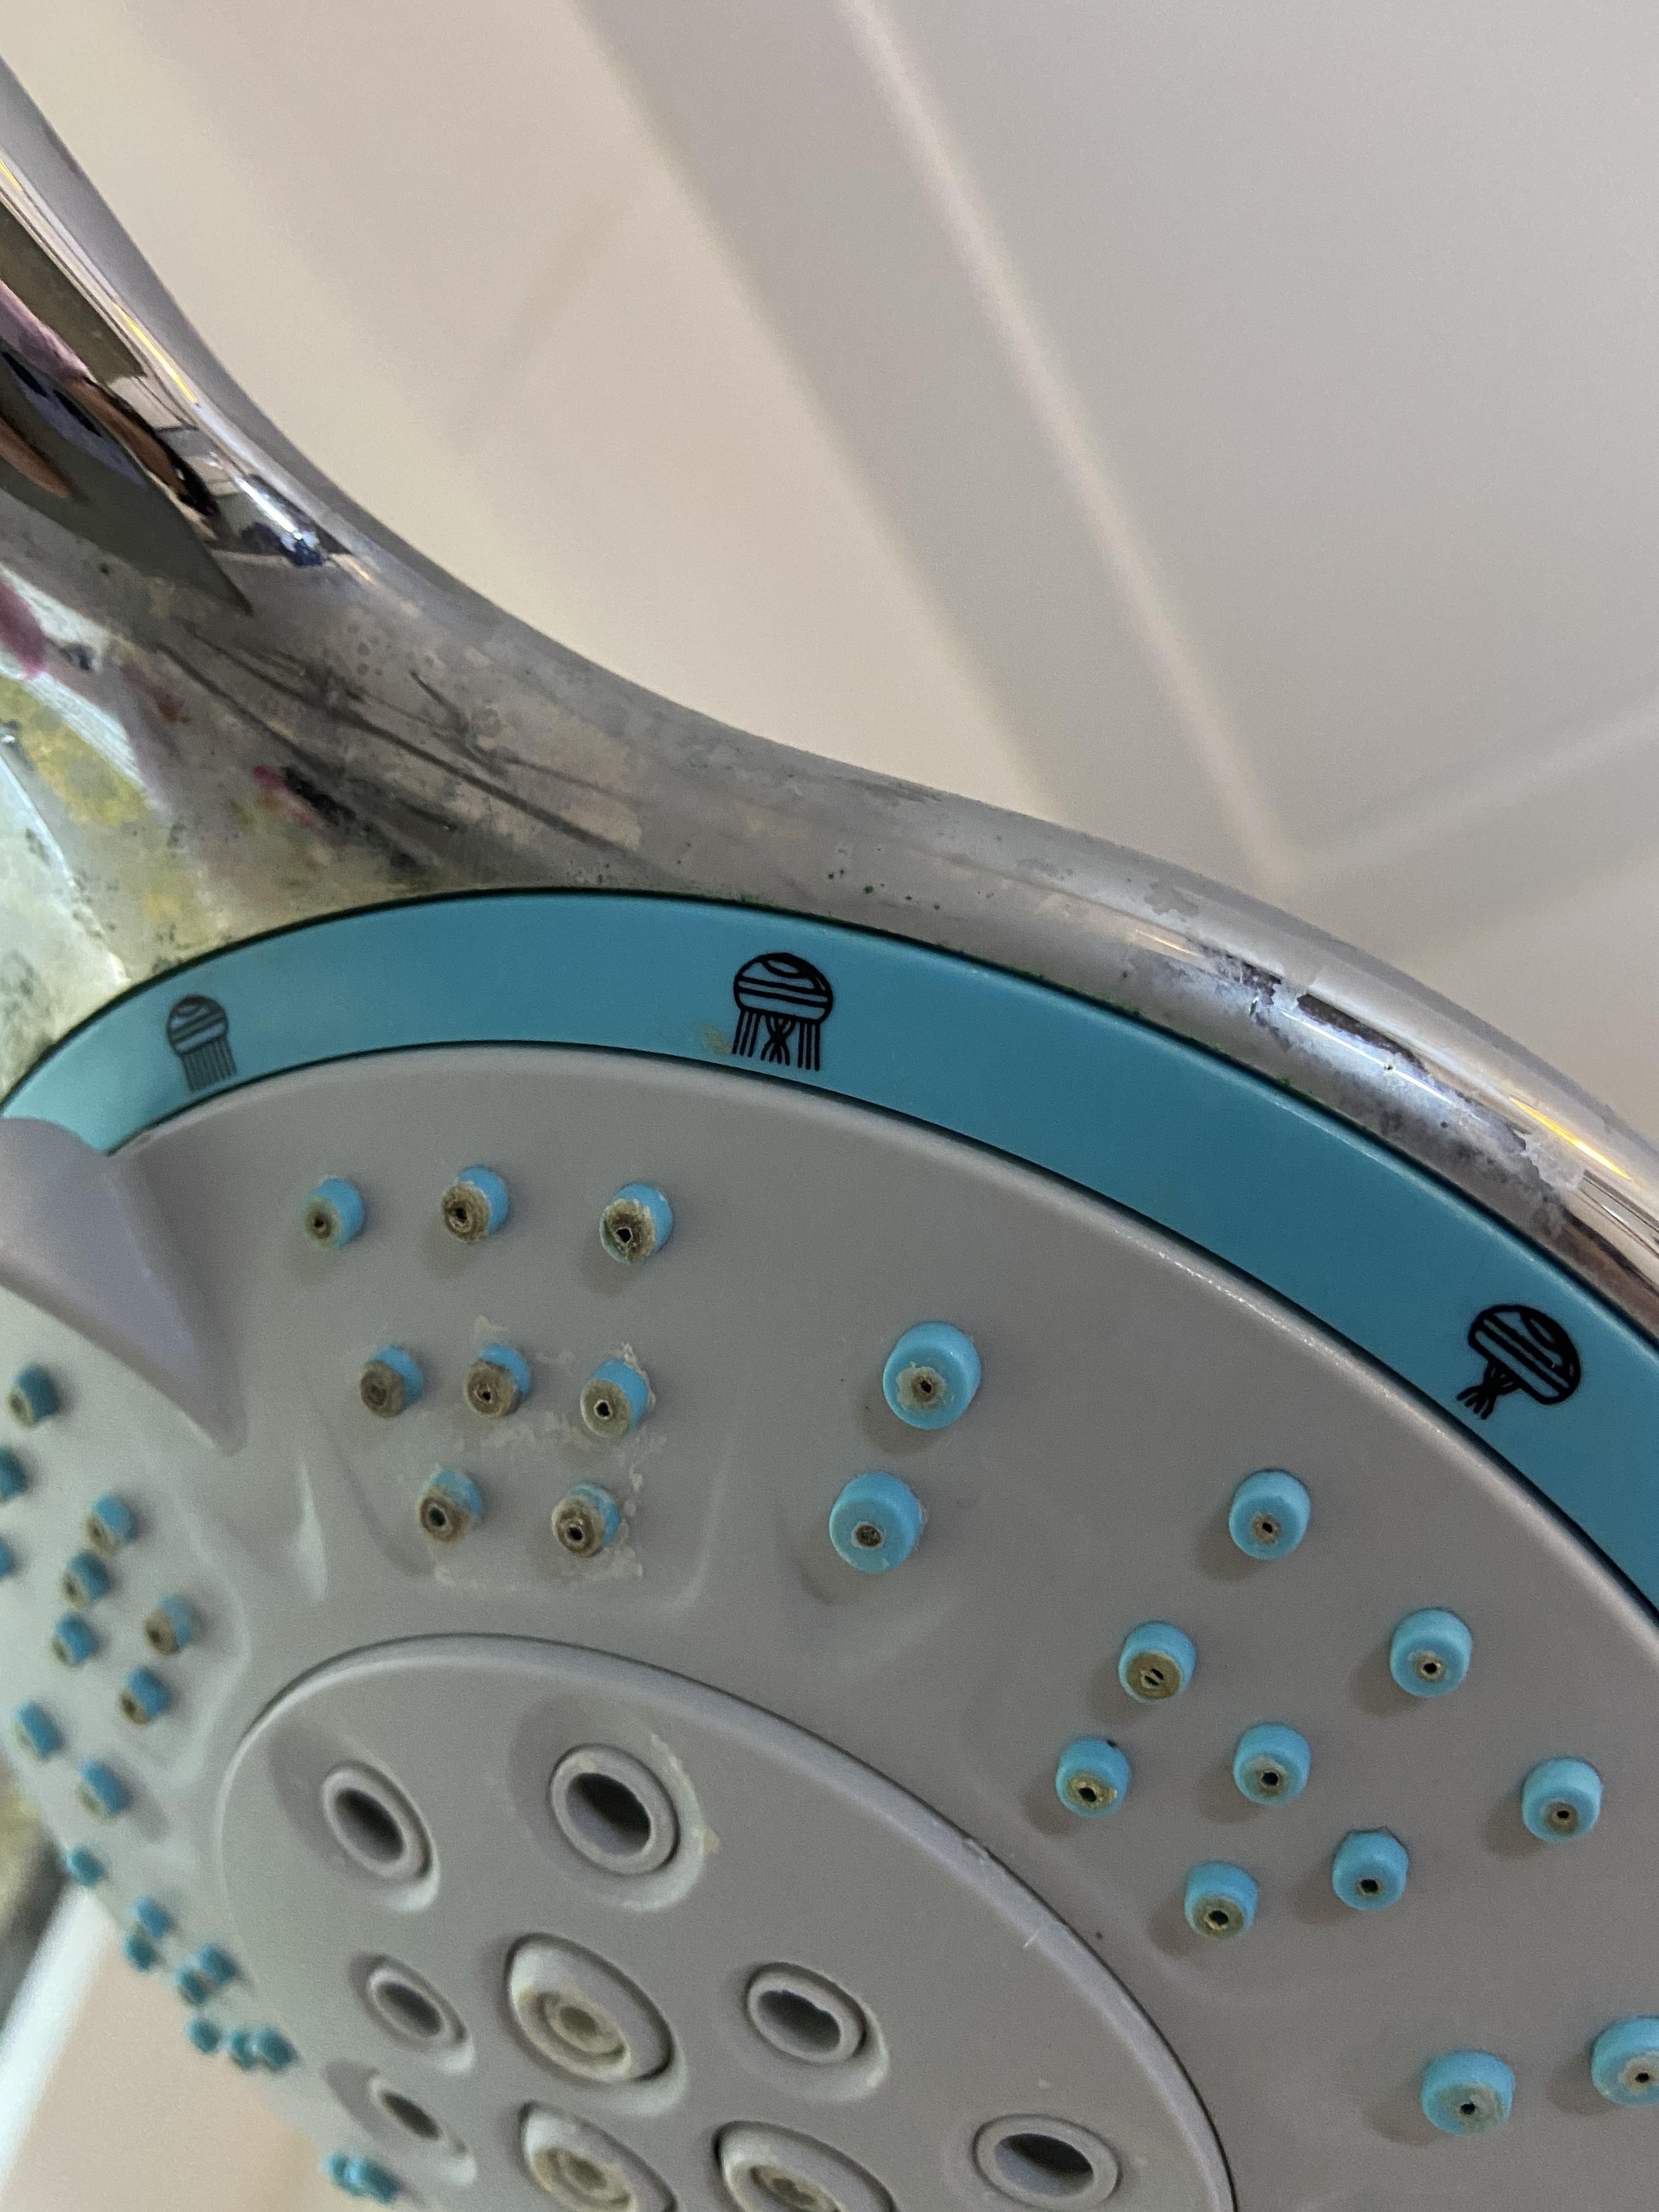 Why is there a jellyfish dance tutorial on my shower head?